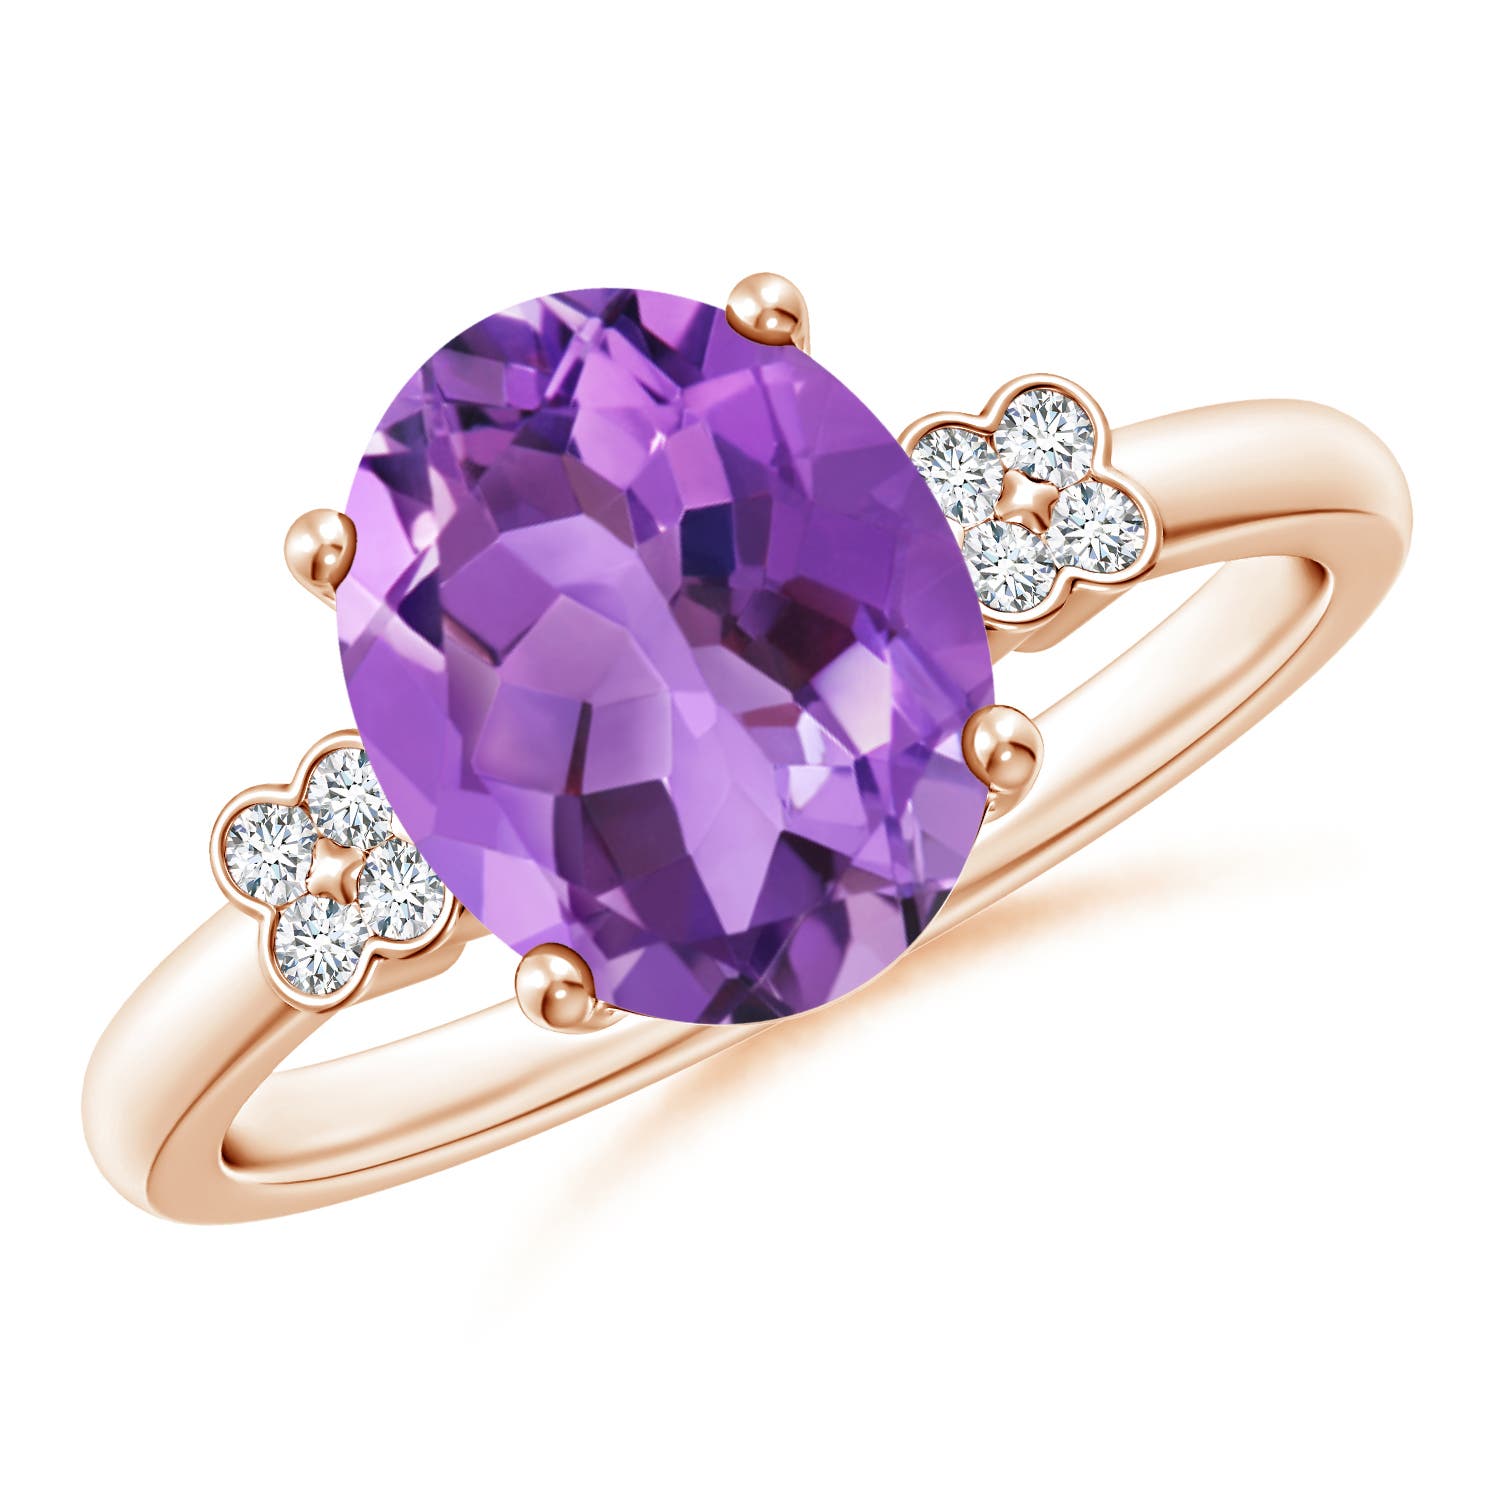 AA - Amethyst / 2.36 CT / 14 KT Rose Gold